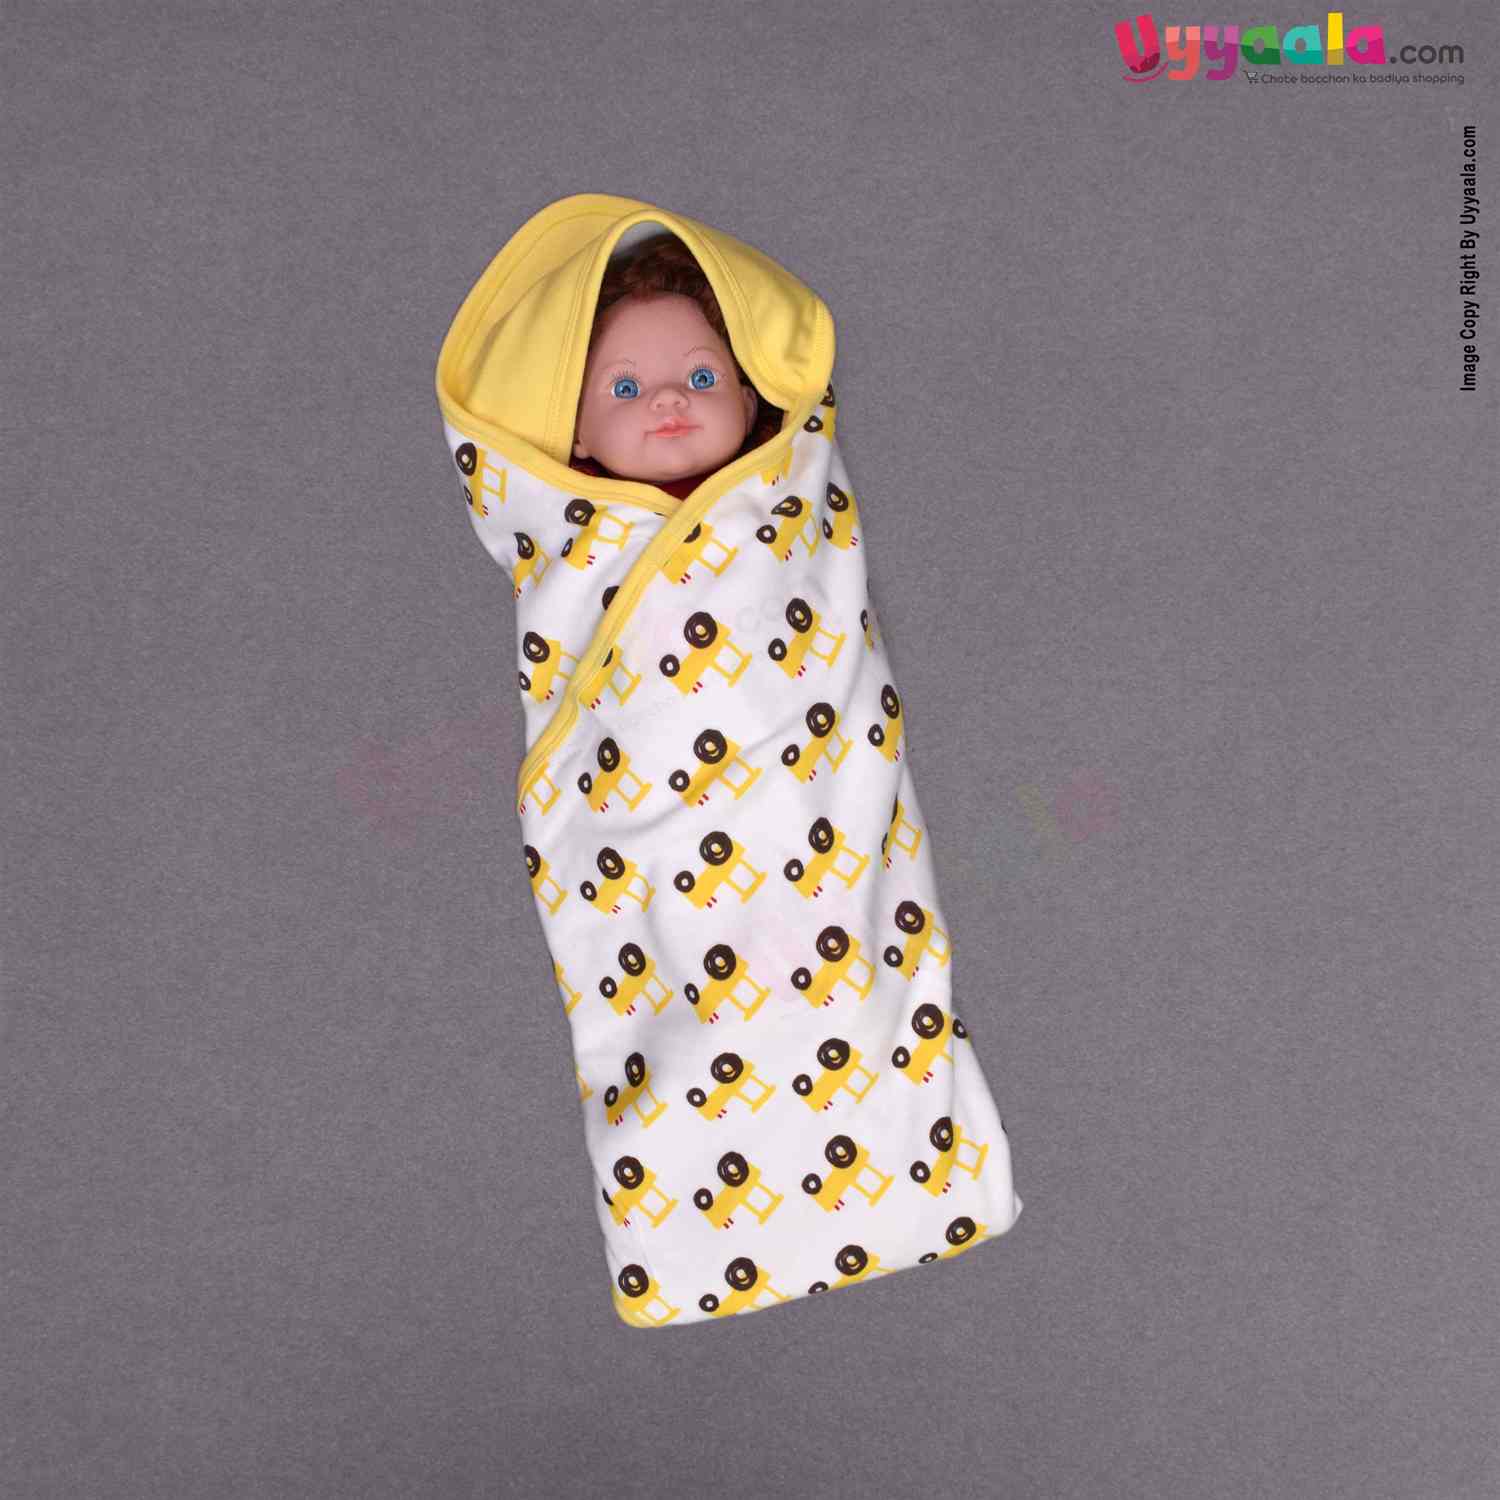 BABY STATION Hooded Double Layer Towel Hosiery Cloth with Tractor Print